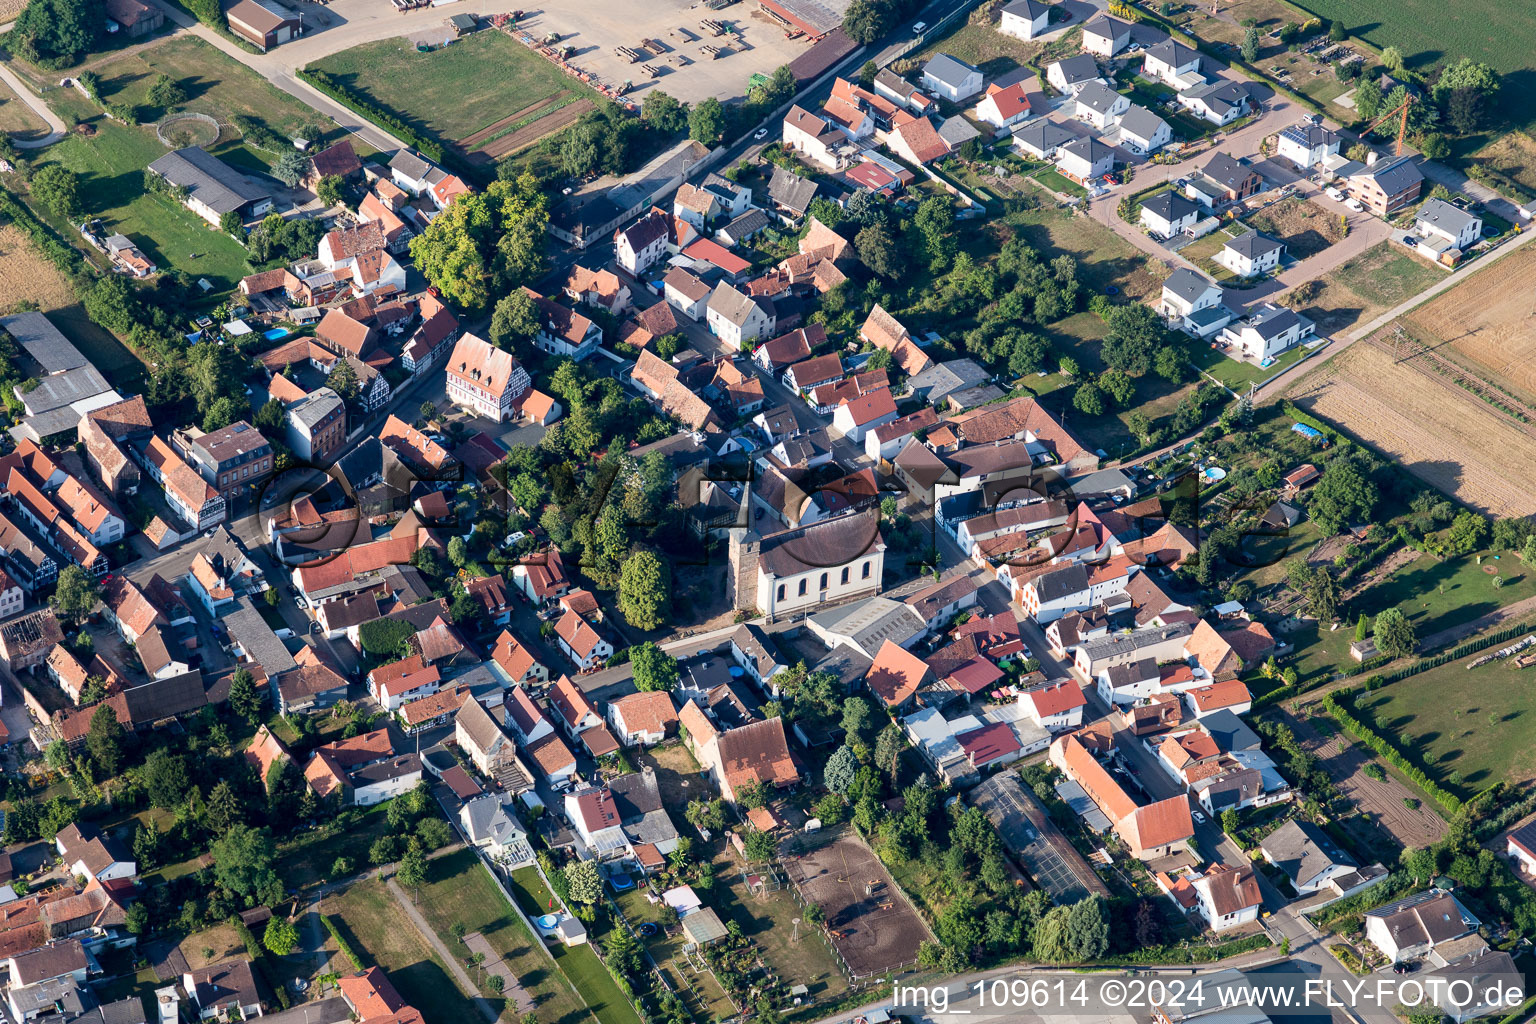 Town View of the streets and houses of the residential areas in Knittelsheim in the state Rhineland-Palatinate, Germany